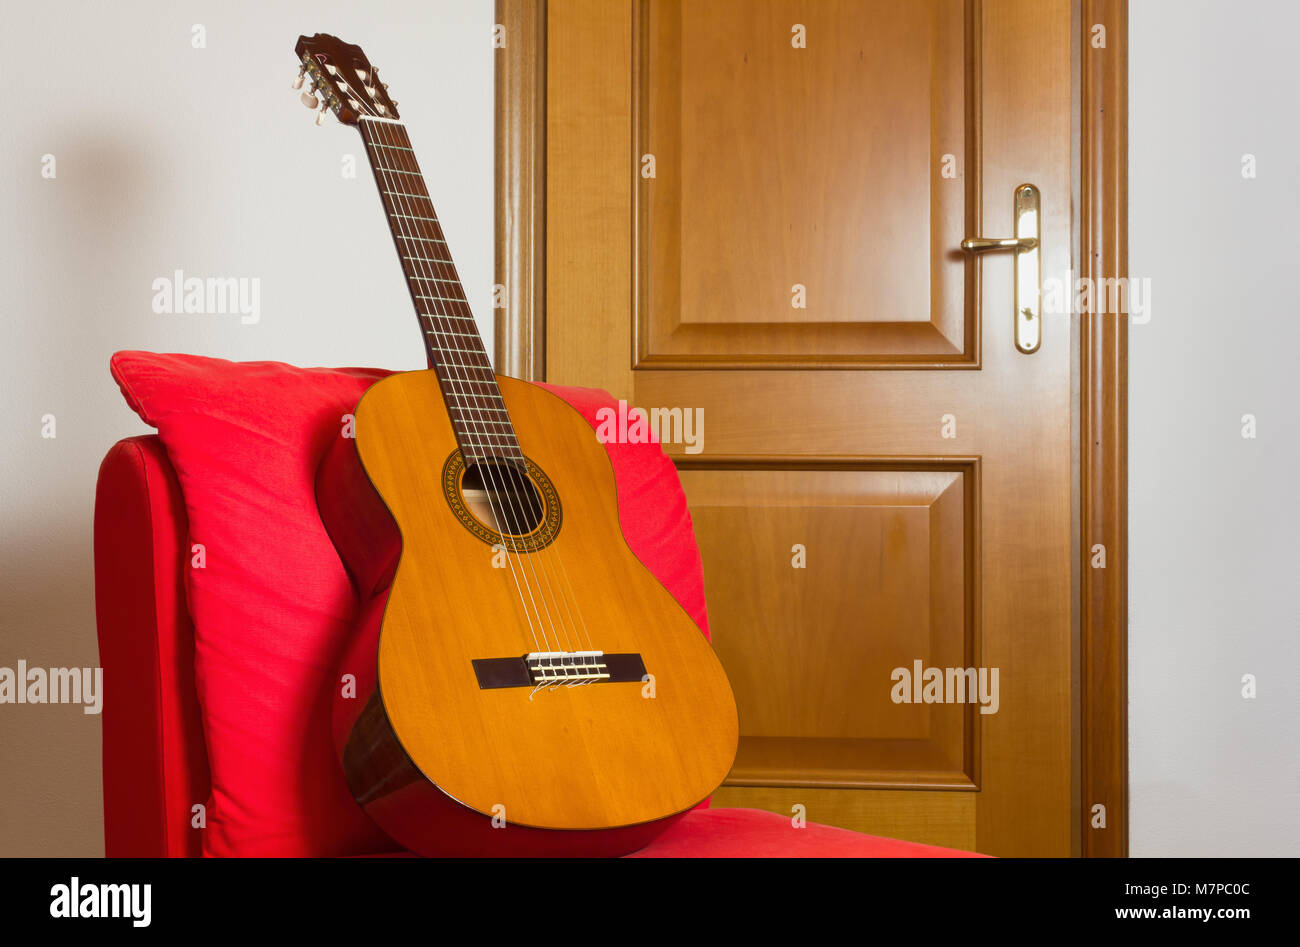 Classical guitar on a red easy chair with a wooden door in the background Stock Photo